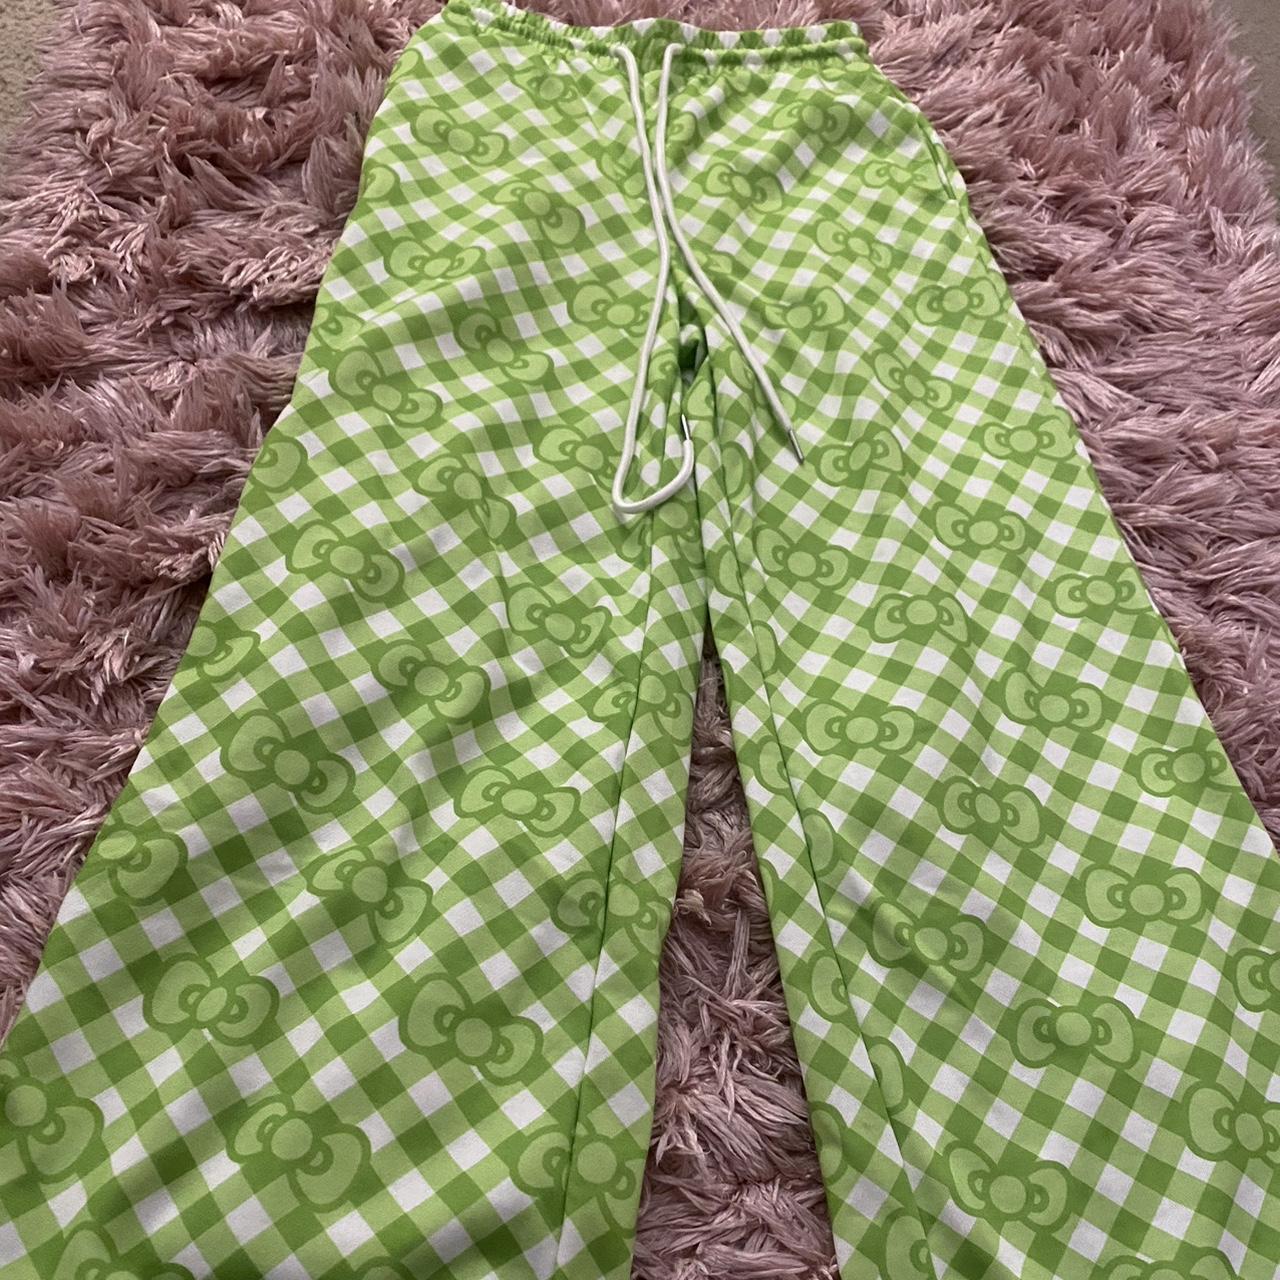 SHEIN Women's Green and White Trousers | Depop